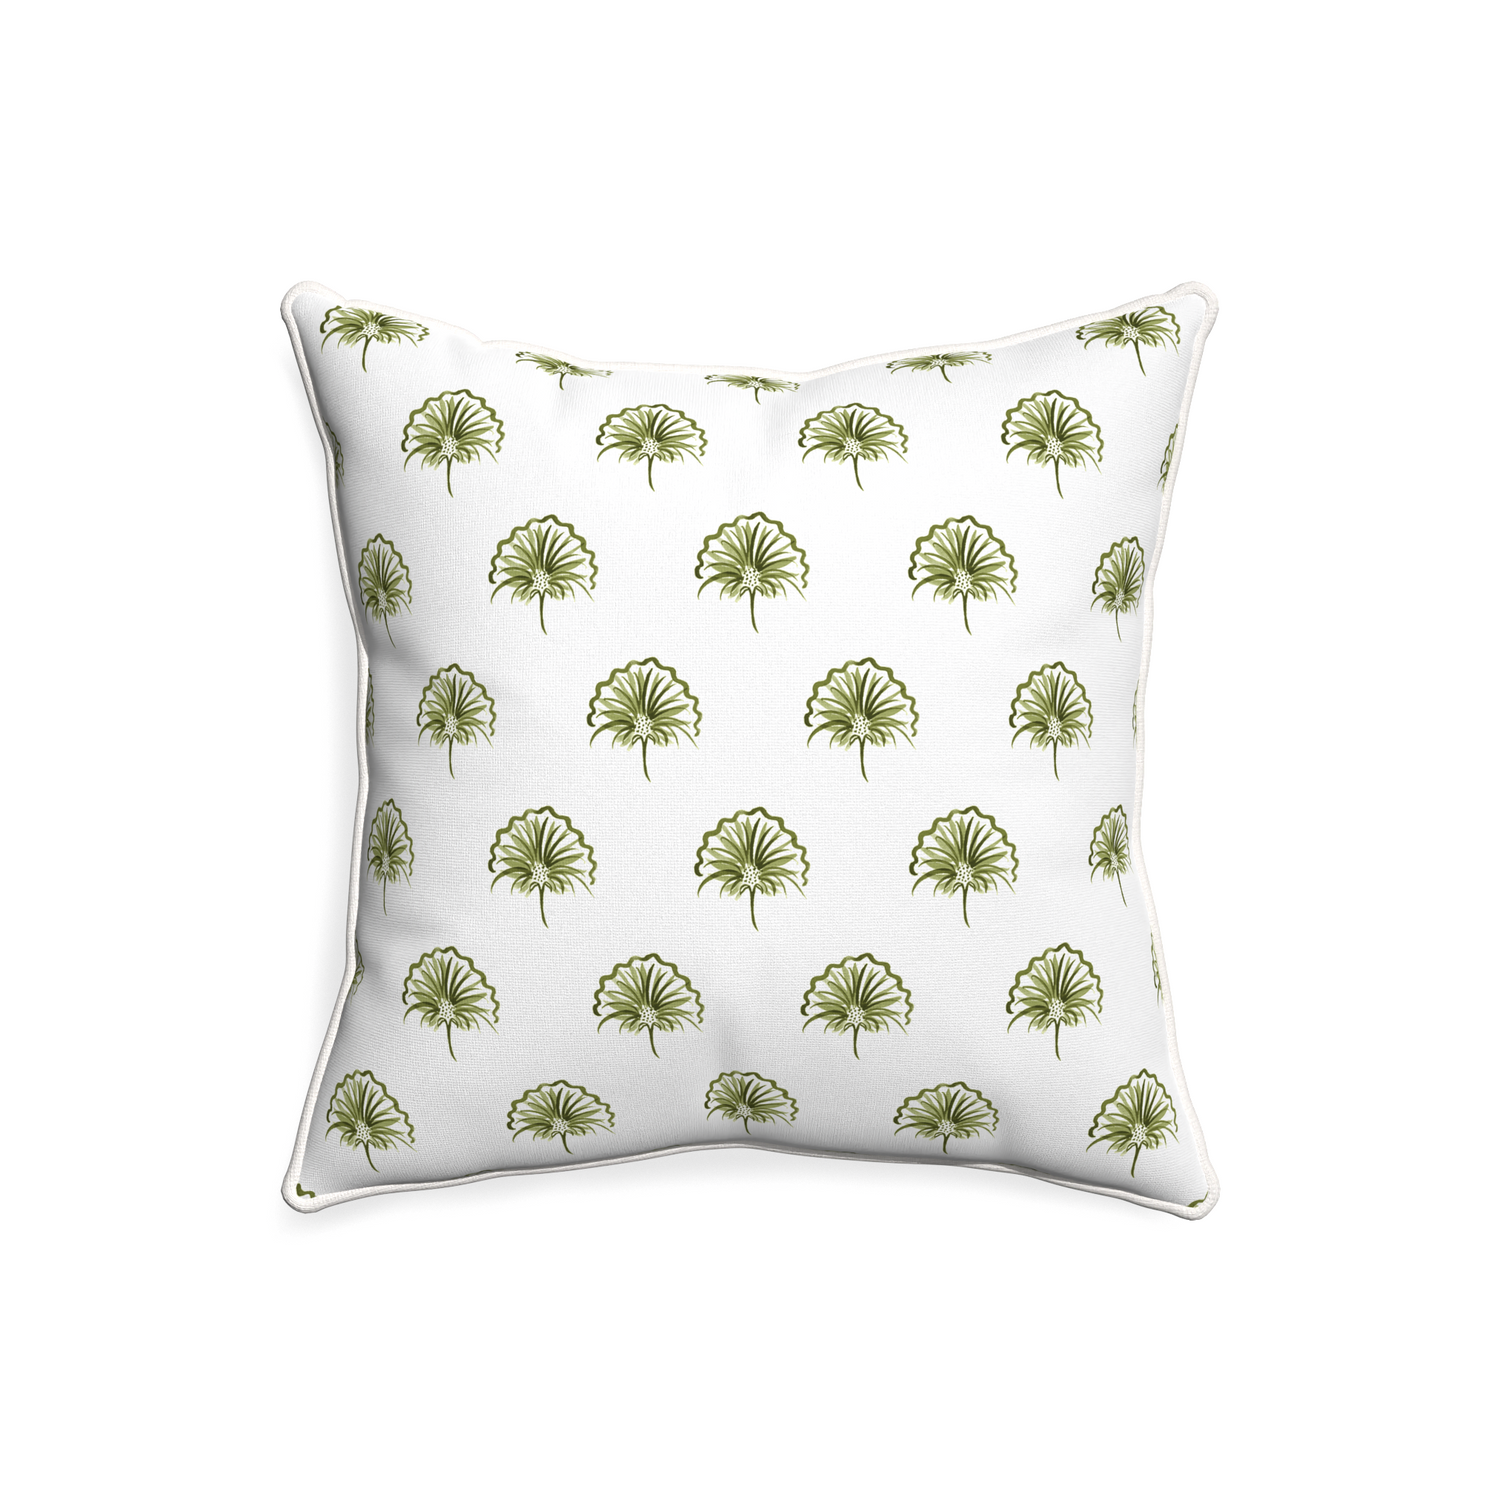 20-square penelope moss custom green floralpillow with snow piping on white background